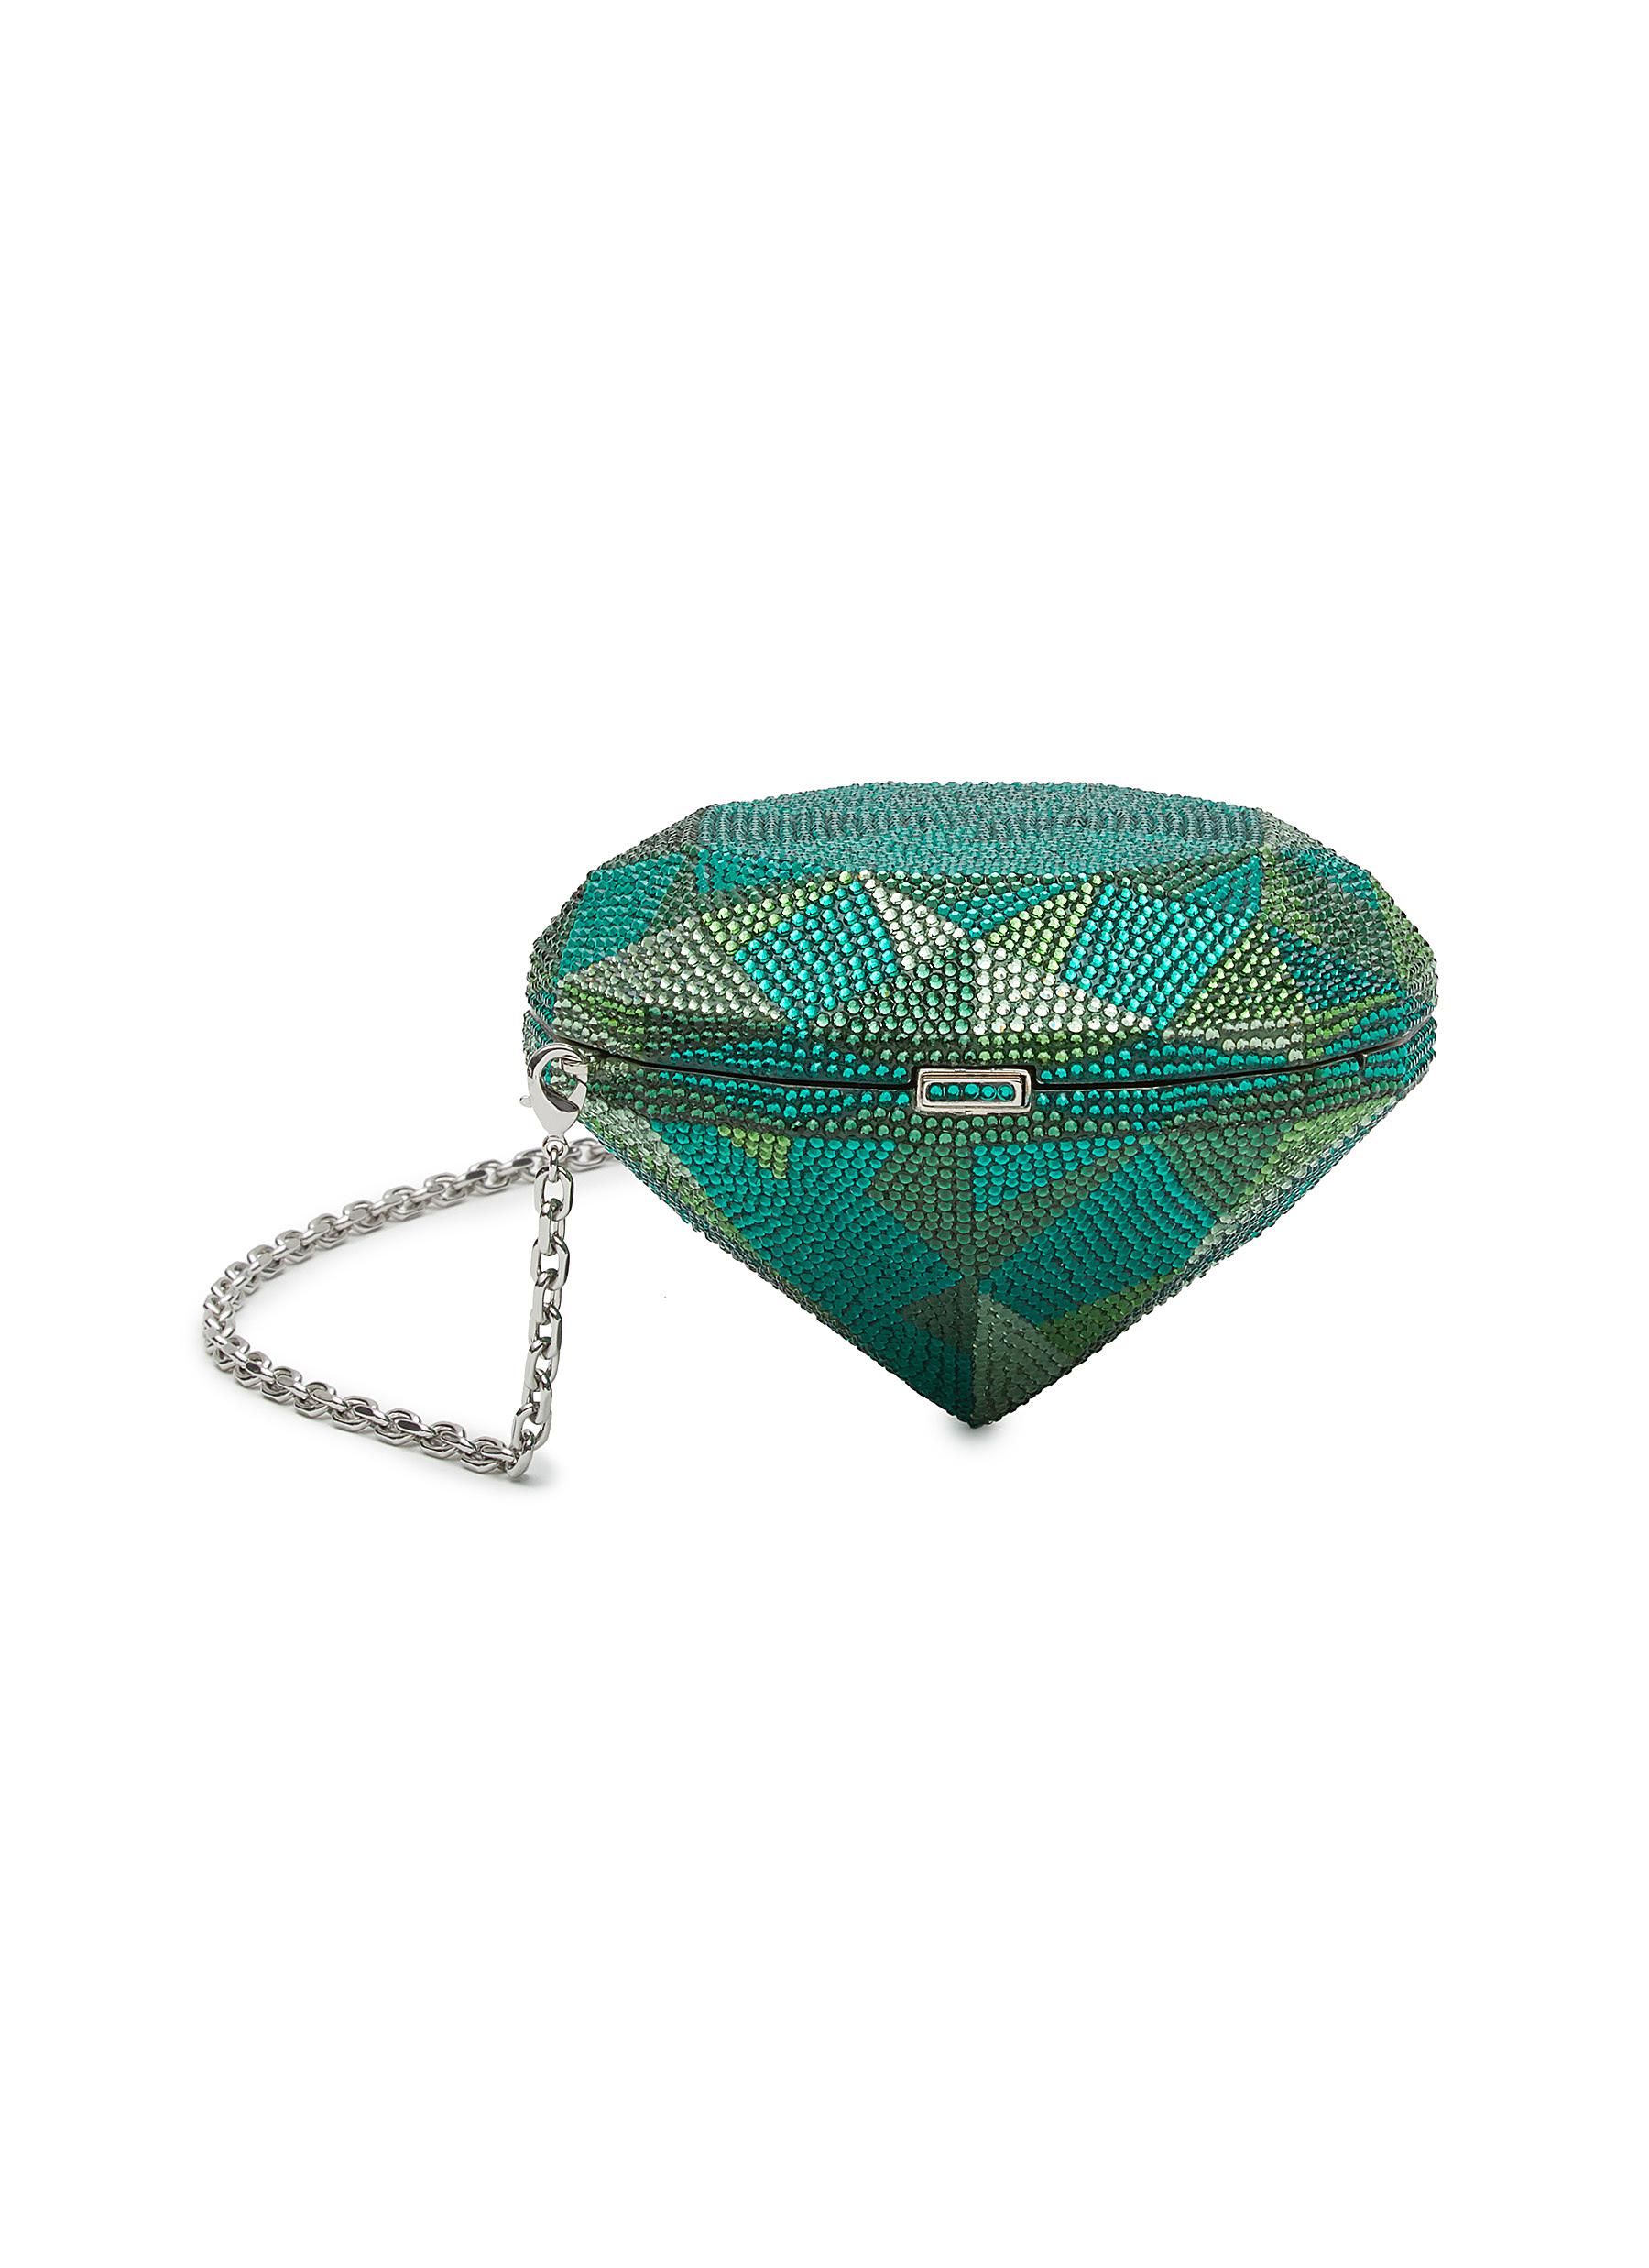 Judith Leiber Crystal French Fries Clutch: Review